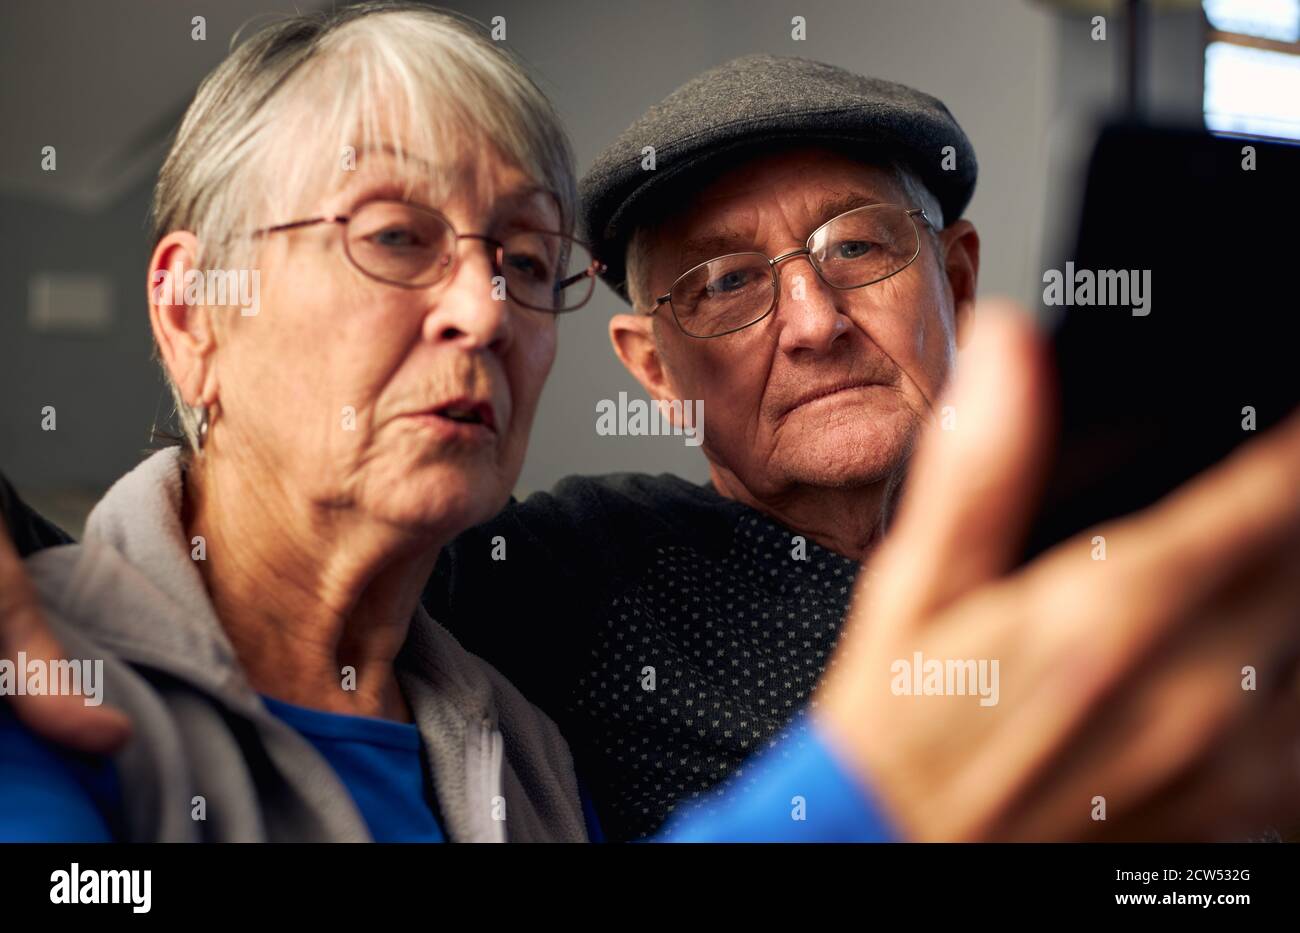 Senior Couple At Home Making Video Call To Family On Mobile Phone Stock Photo